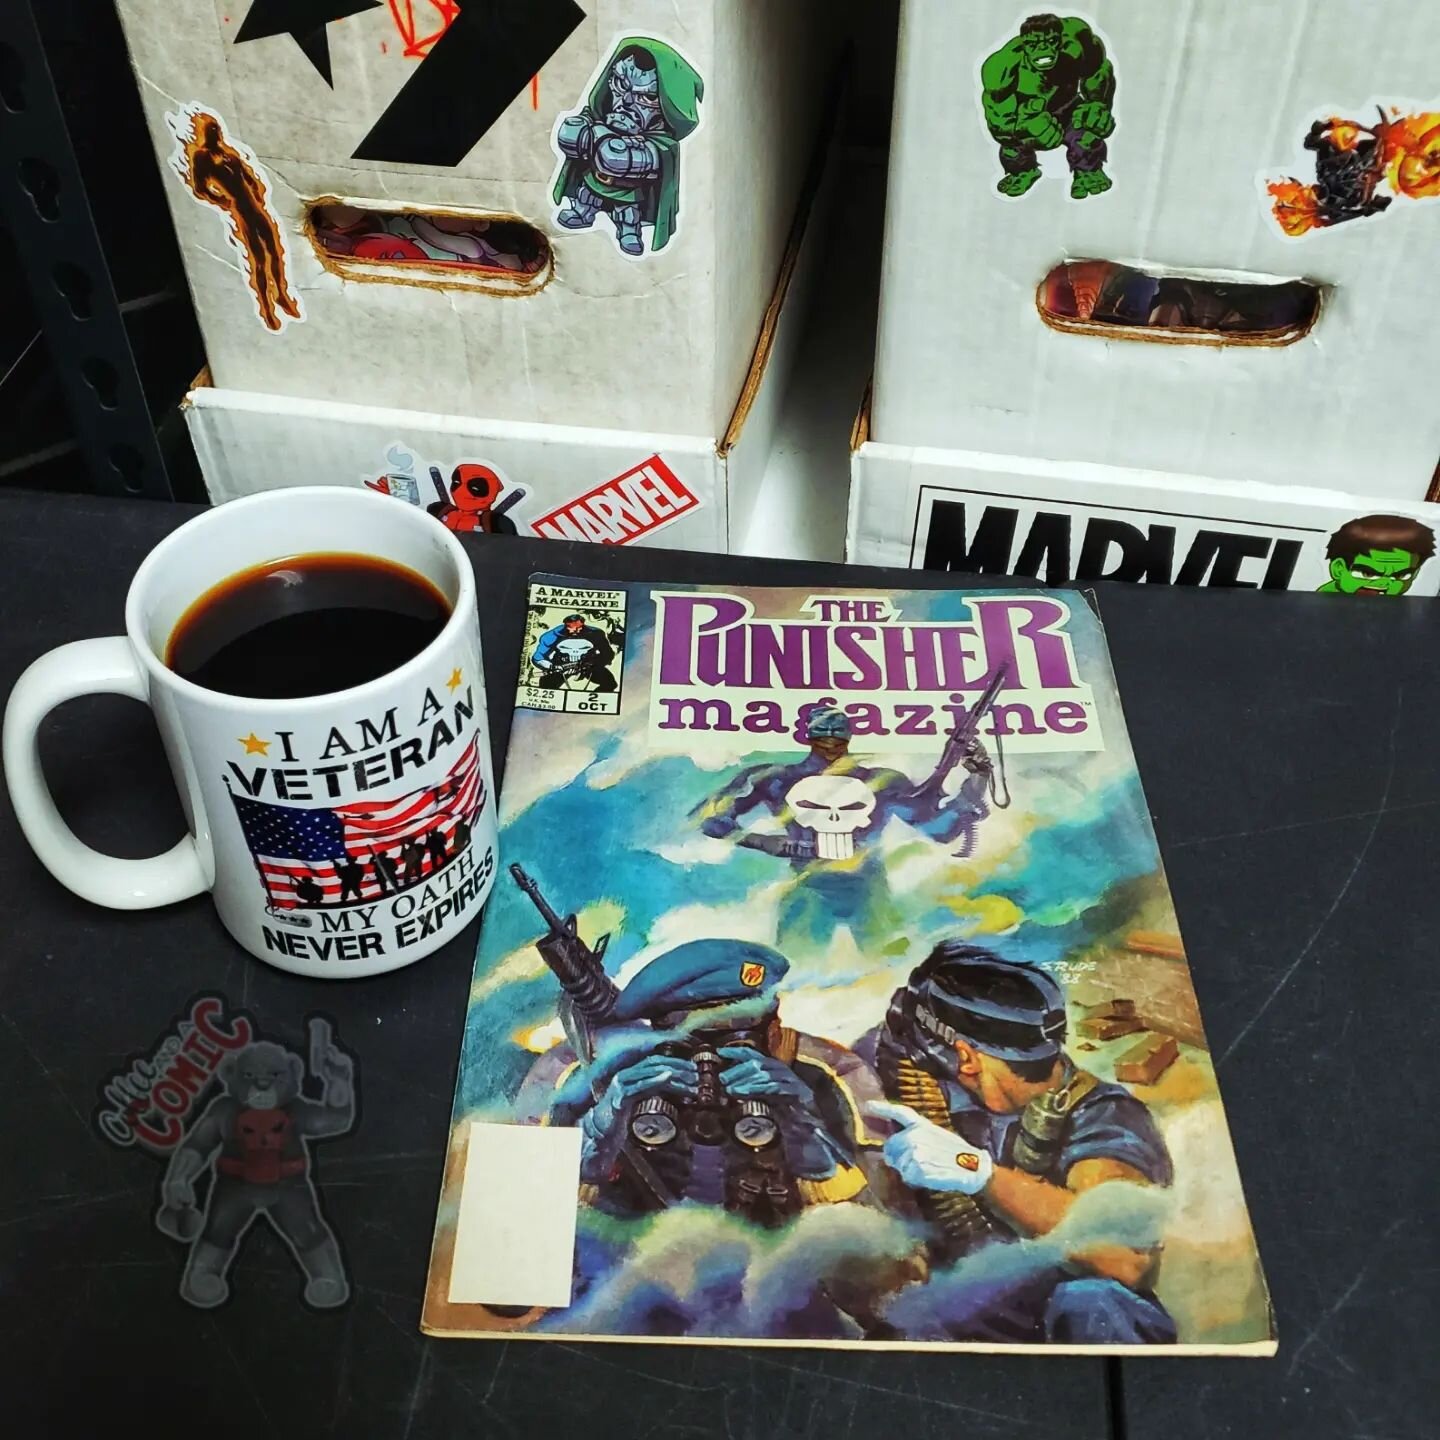 Today's coffee ☕ and a comic 📓 is one of the coolest 😎 magazine editions to ever be created! 

In the seedy underbelly of crime-ridden streets, the Punisher wages his brutal war on the criminal scum infesting every shadowy corner. &quot;Punisher Ma